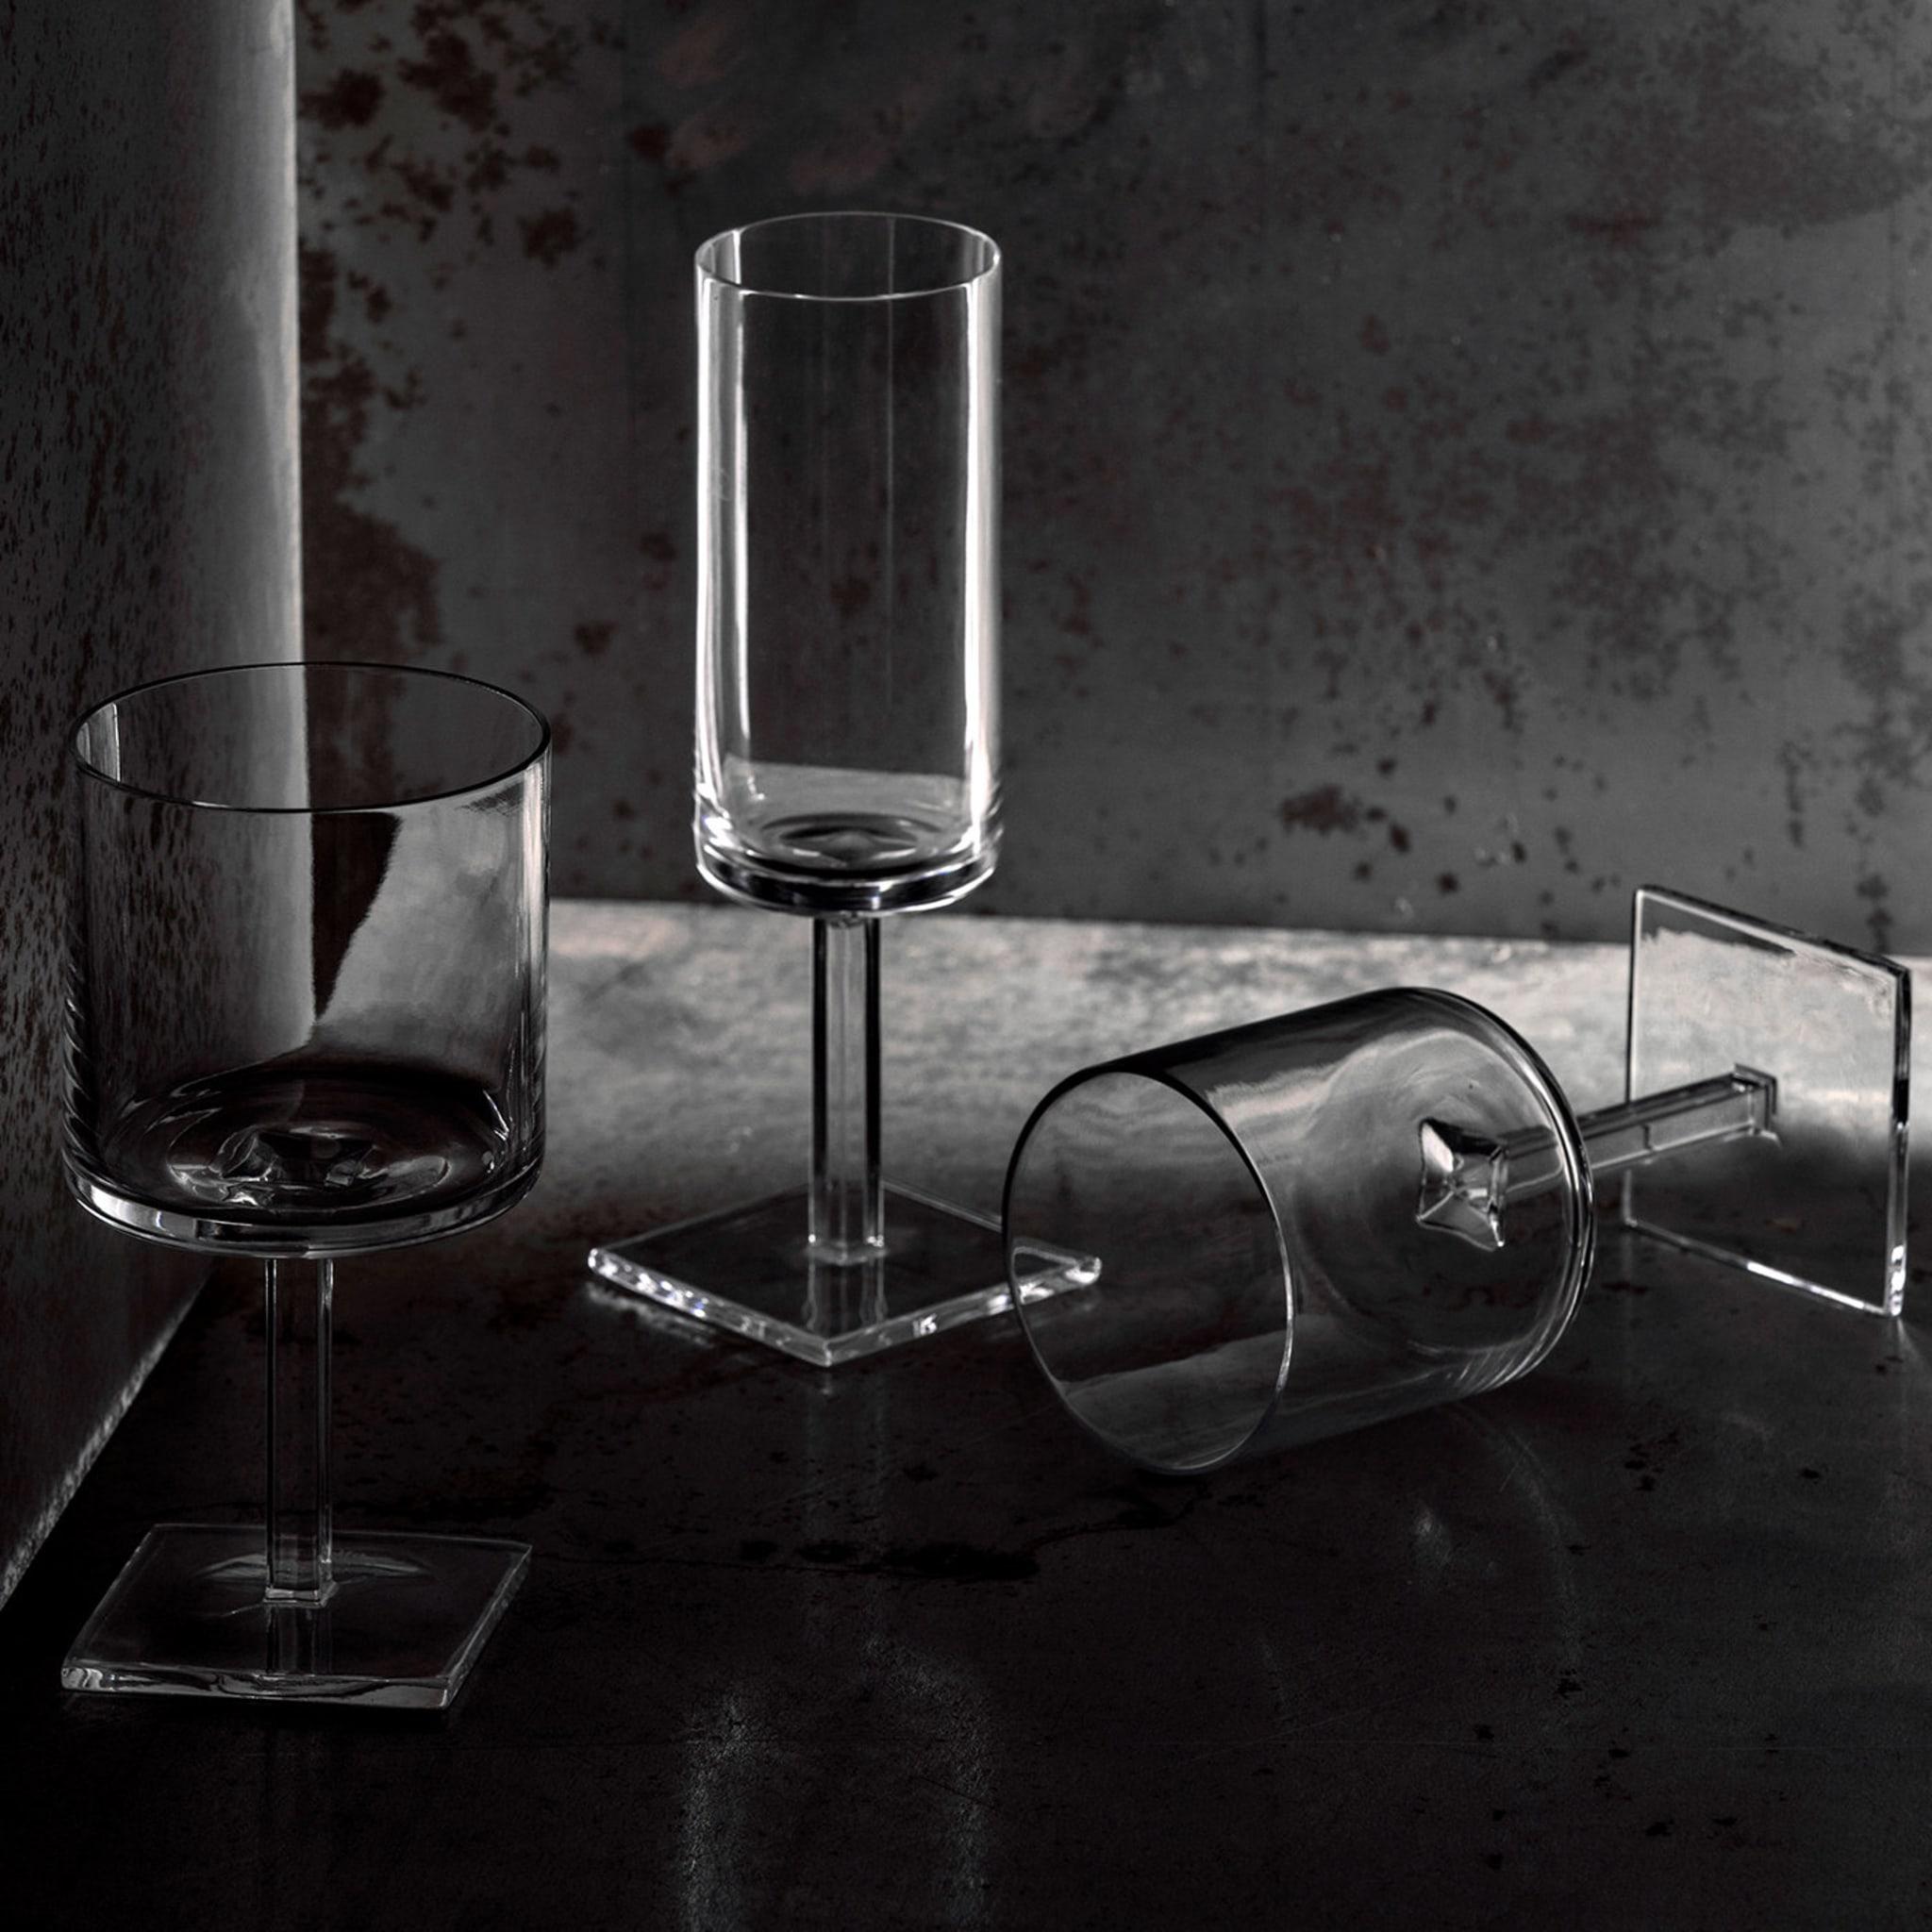 This set of two wine goblets was designed in 2004 by Michele De Lucchi with Alberto Nason and is part of the Laetitia Collection. The futuristic and elegant silhouette combines an ultra-thin, square base and the curved volumes of the bowl for a